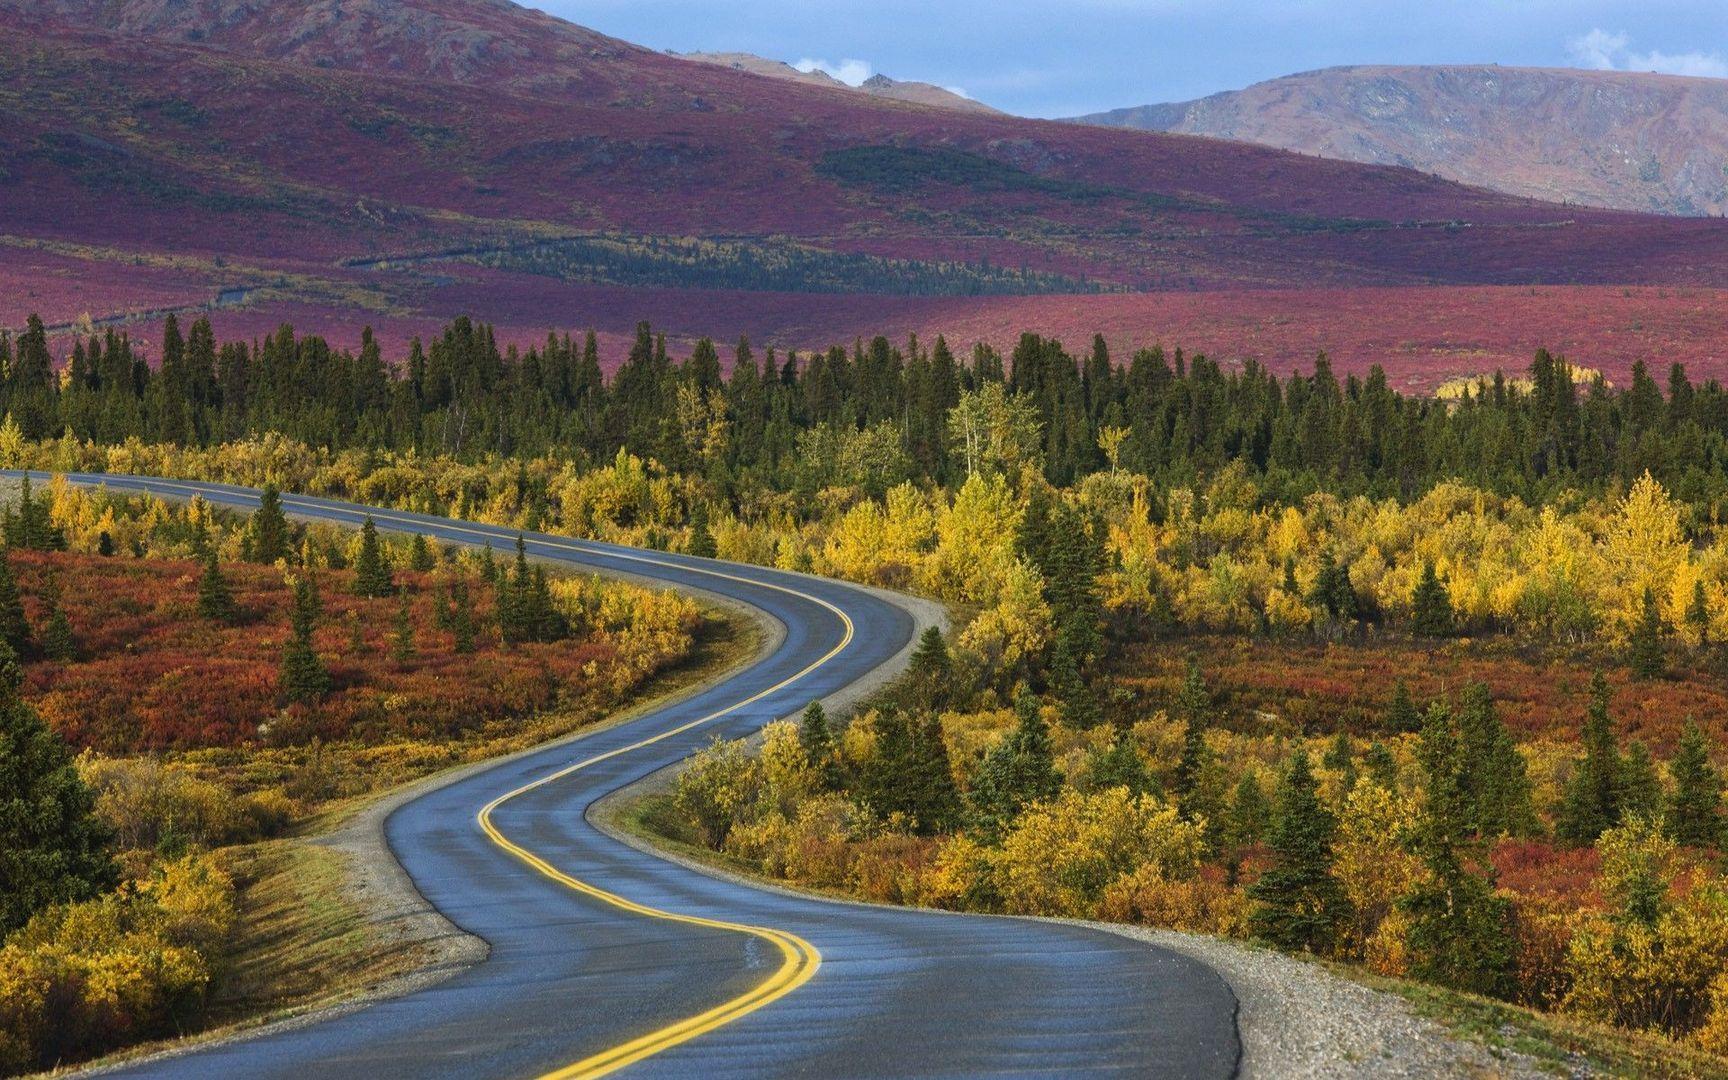 Winding Road Wallpaper High Quality. Download Free. Road trip